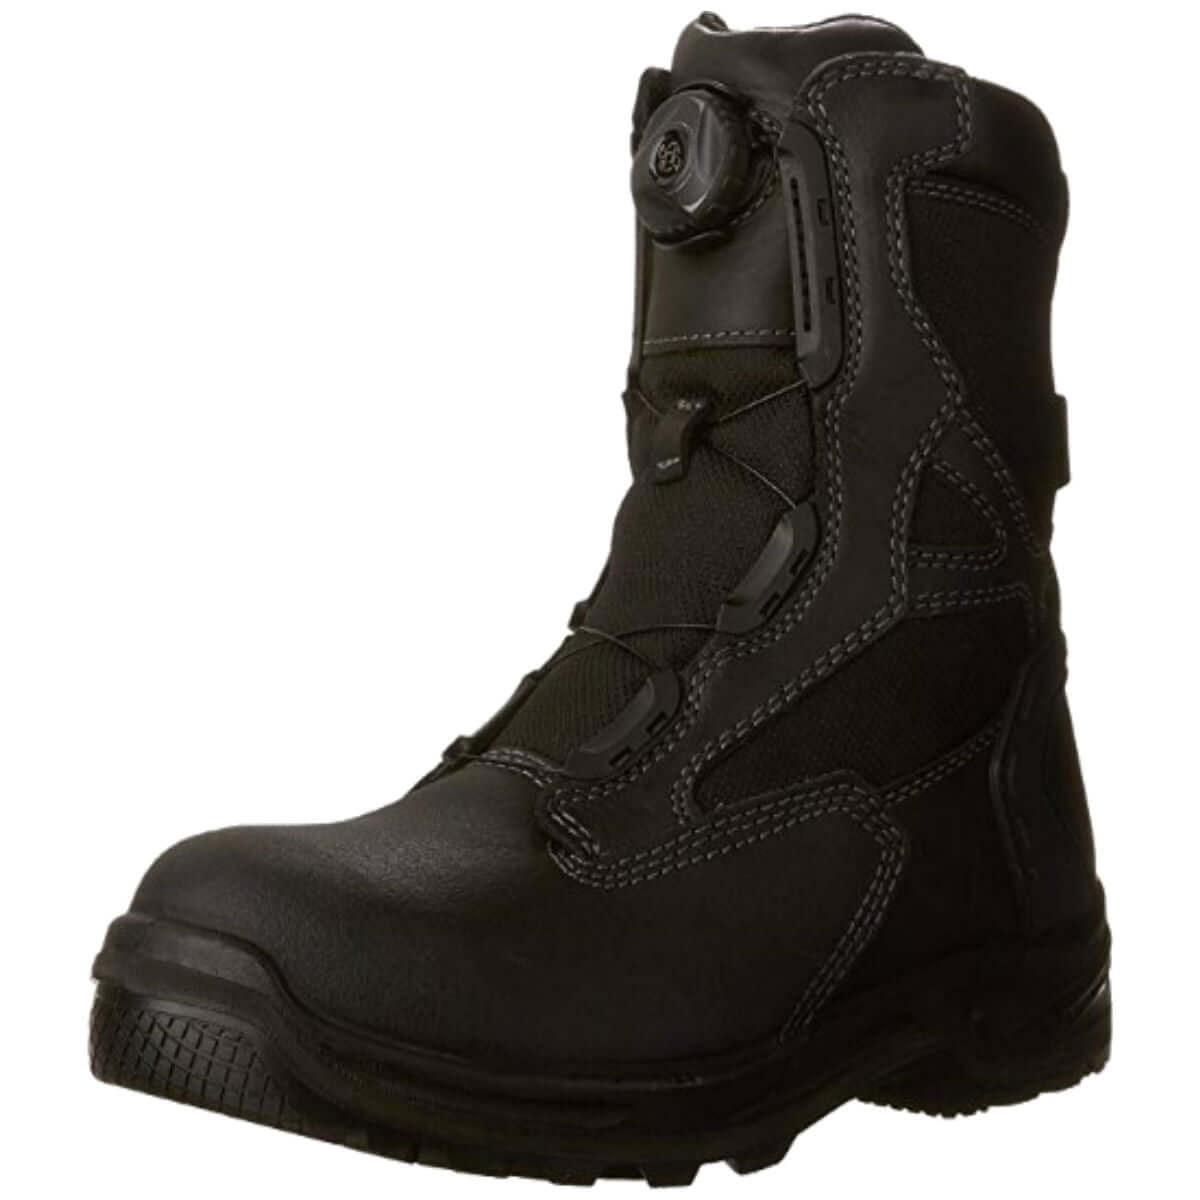 Best Boa Work Boots of 2022 (Top Rated and Reviewed)